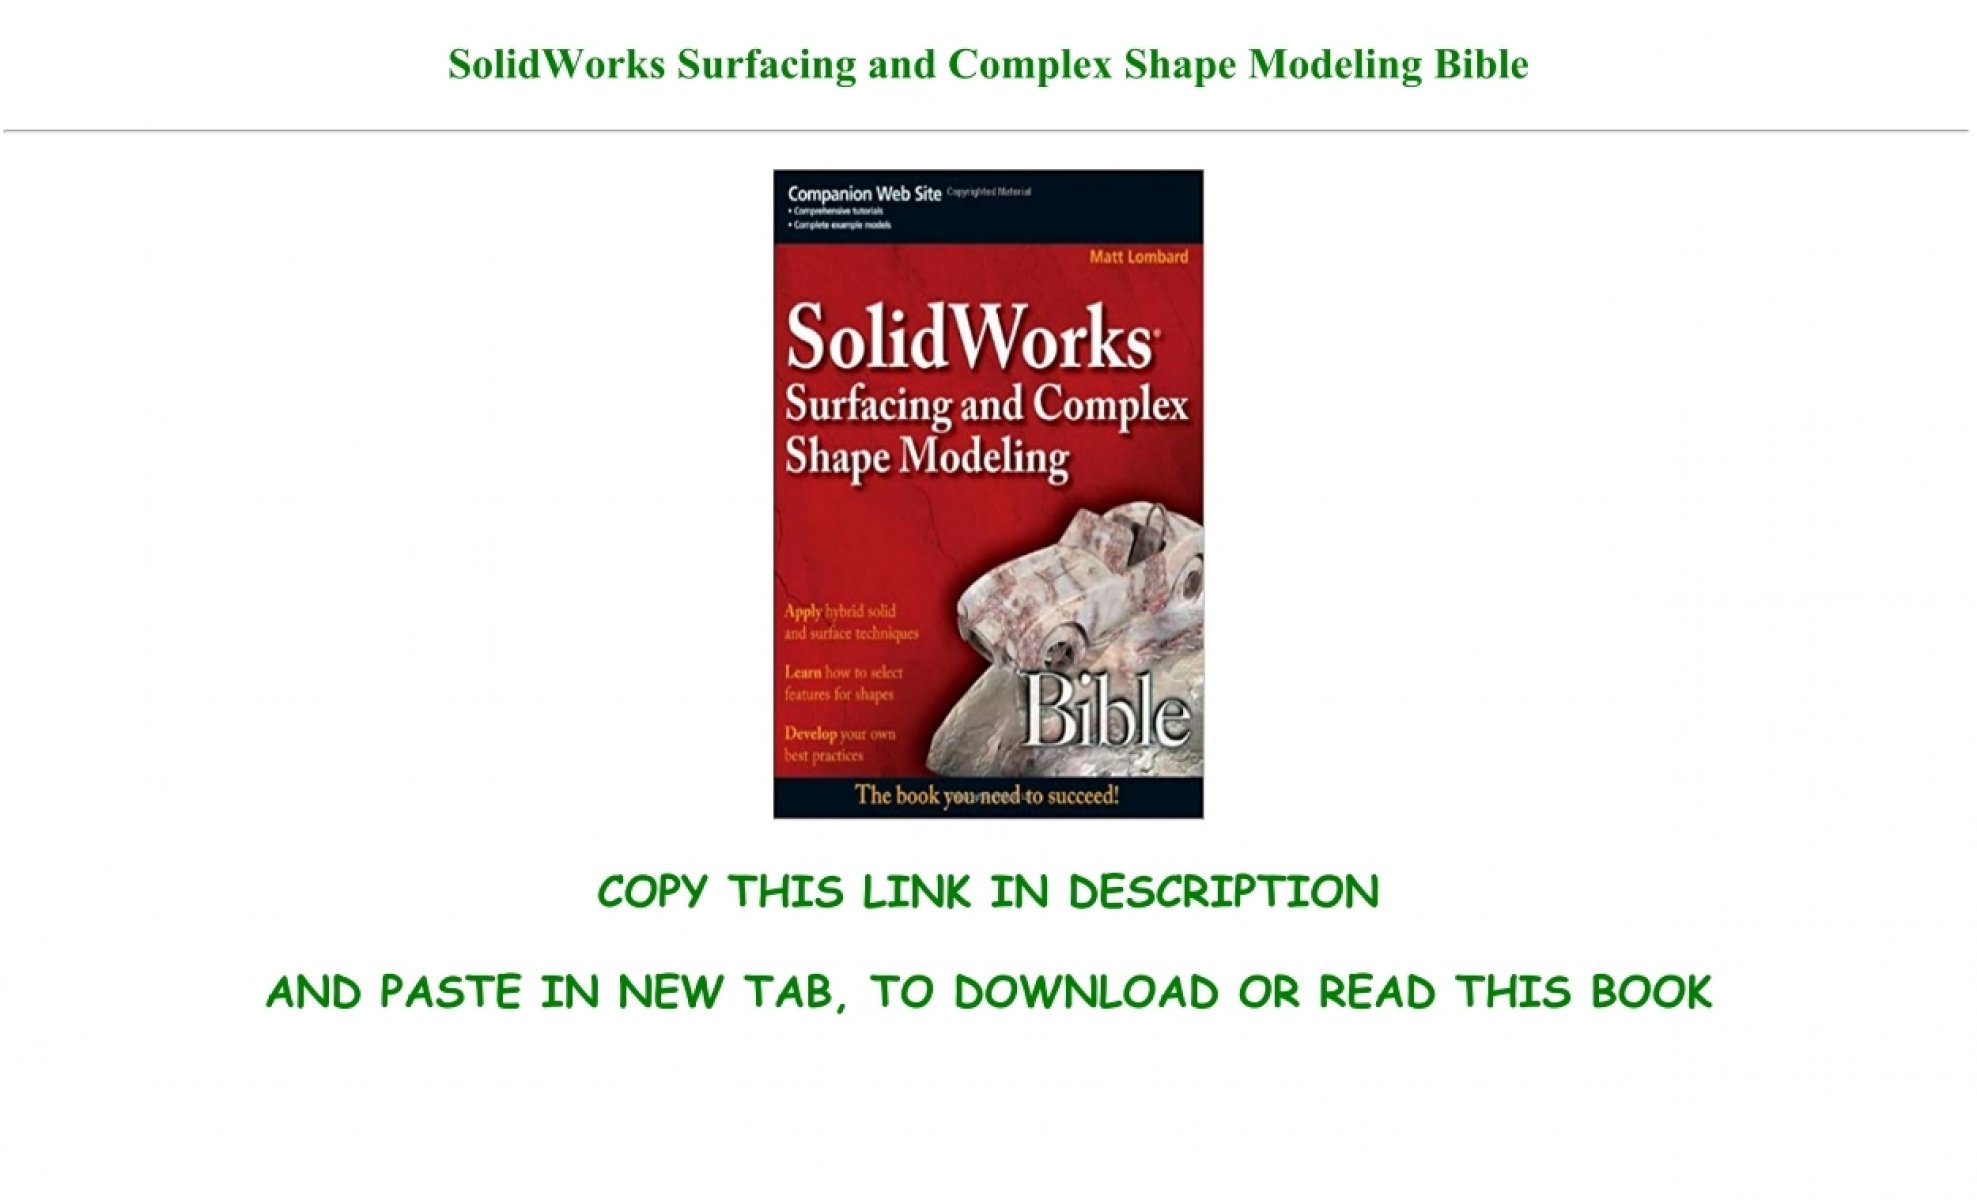 solidworks surfacing and complex shape modeling bible free download